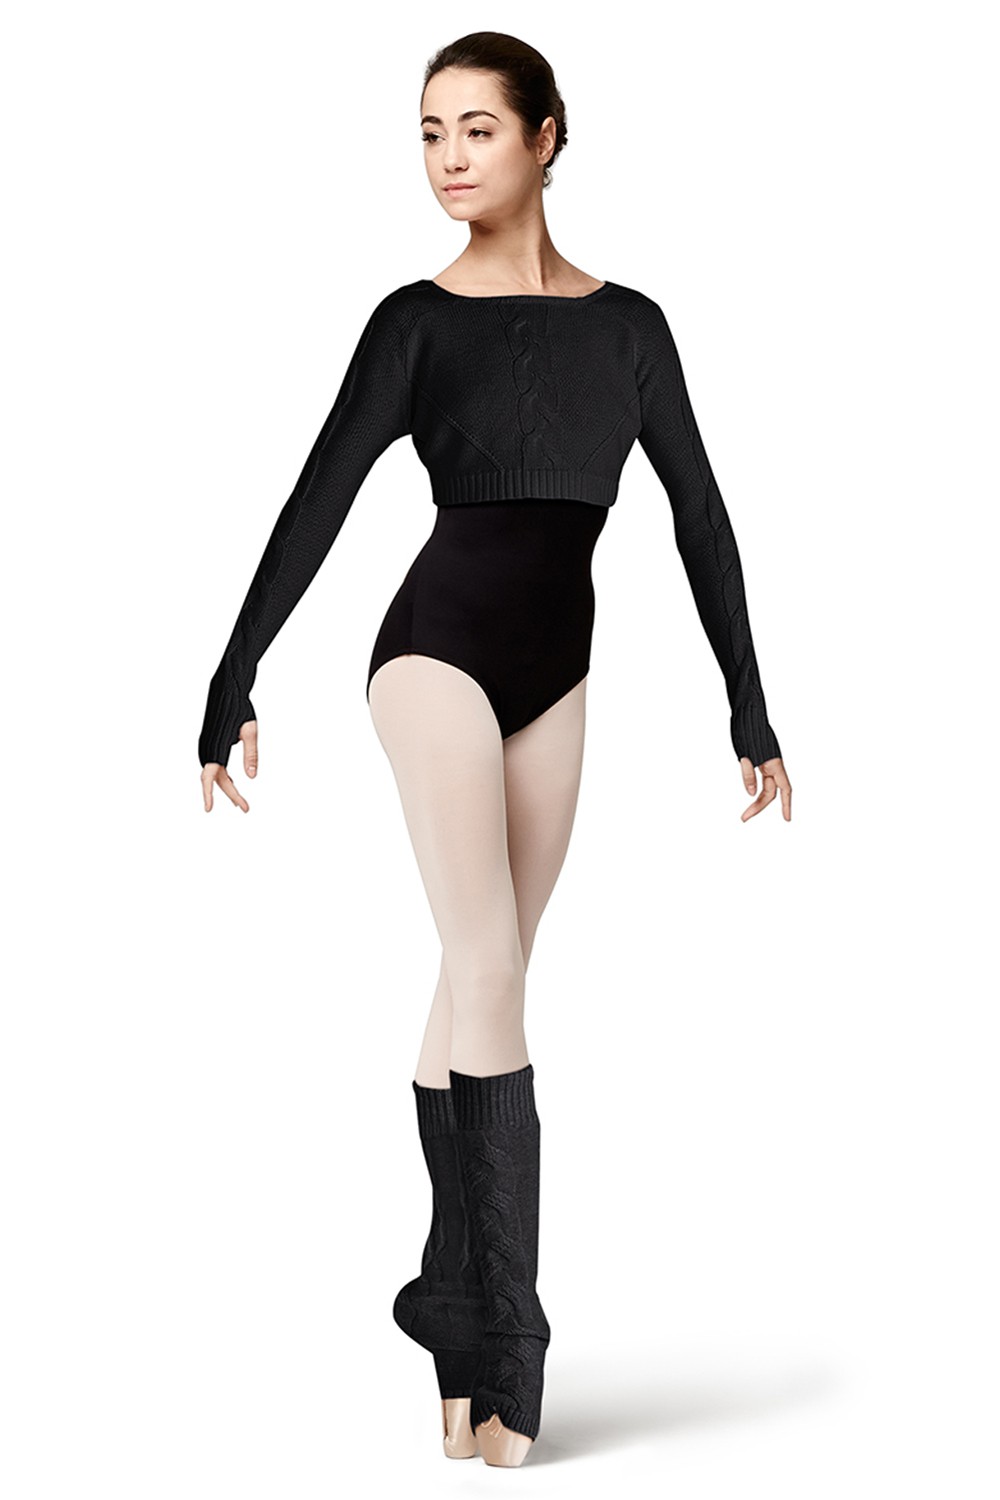 Bloch Womens Warm Up Boots Dancewear Bloch Shop Uk with The Most Elegant  Ballet Warm Up Clothes for Dream